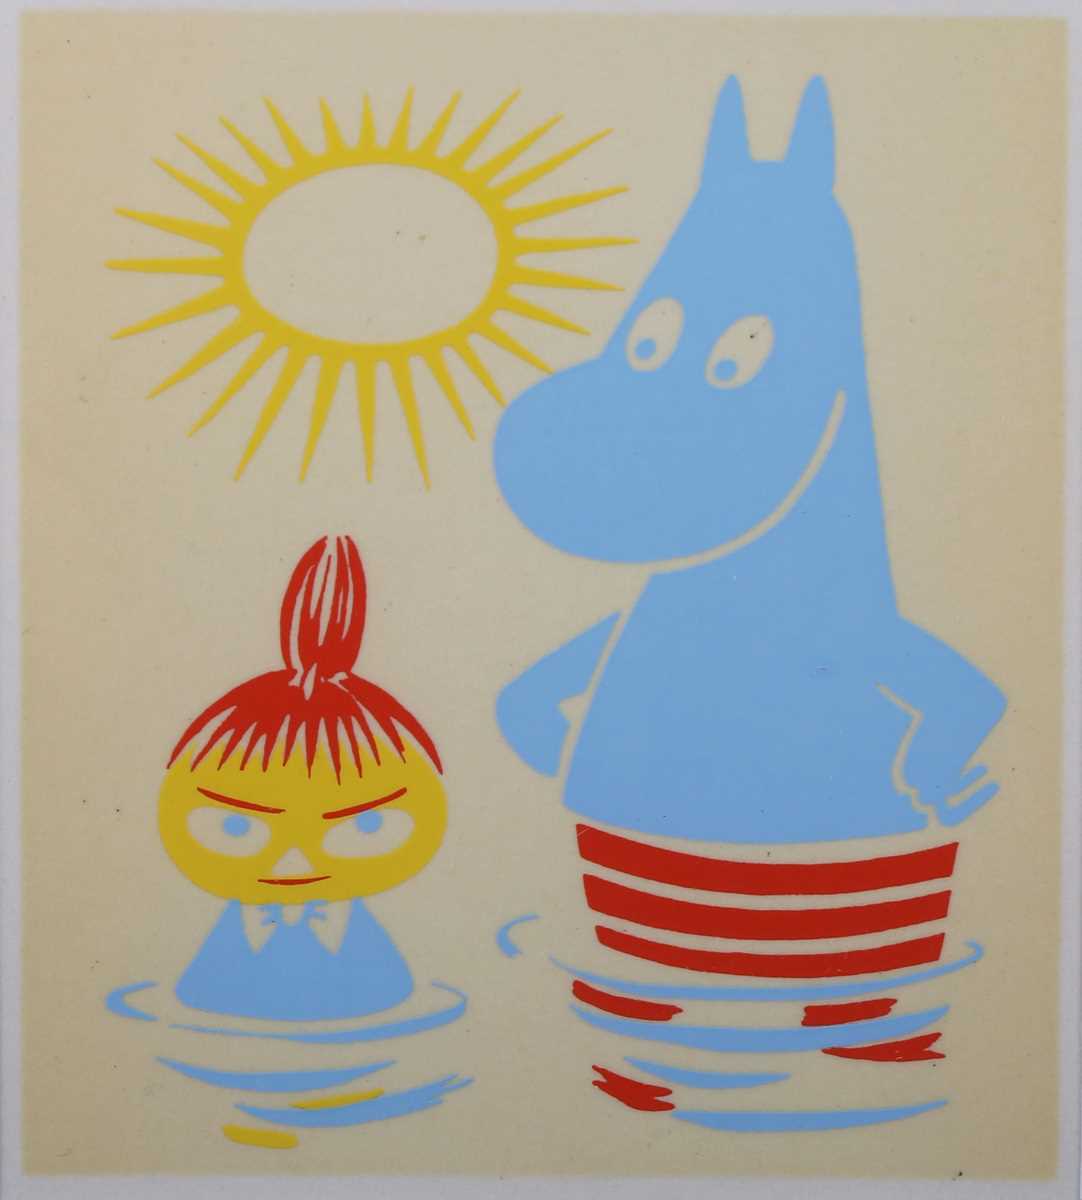 Tove Jansson – ‘Moomintroll & Little My, Snufkin, Snorkmaiden and Sniff’ (Moomin Series), four